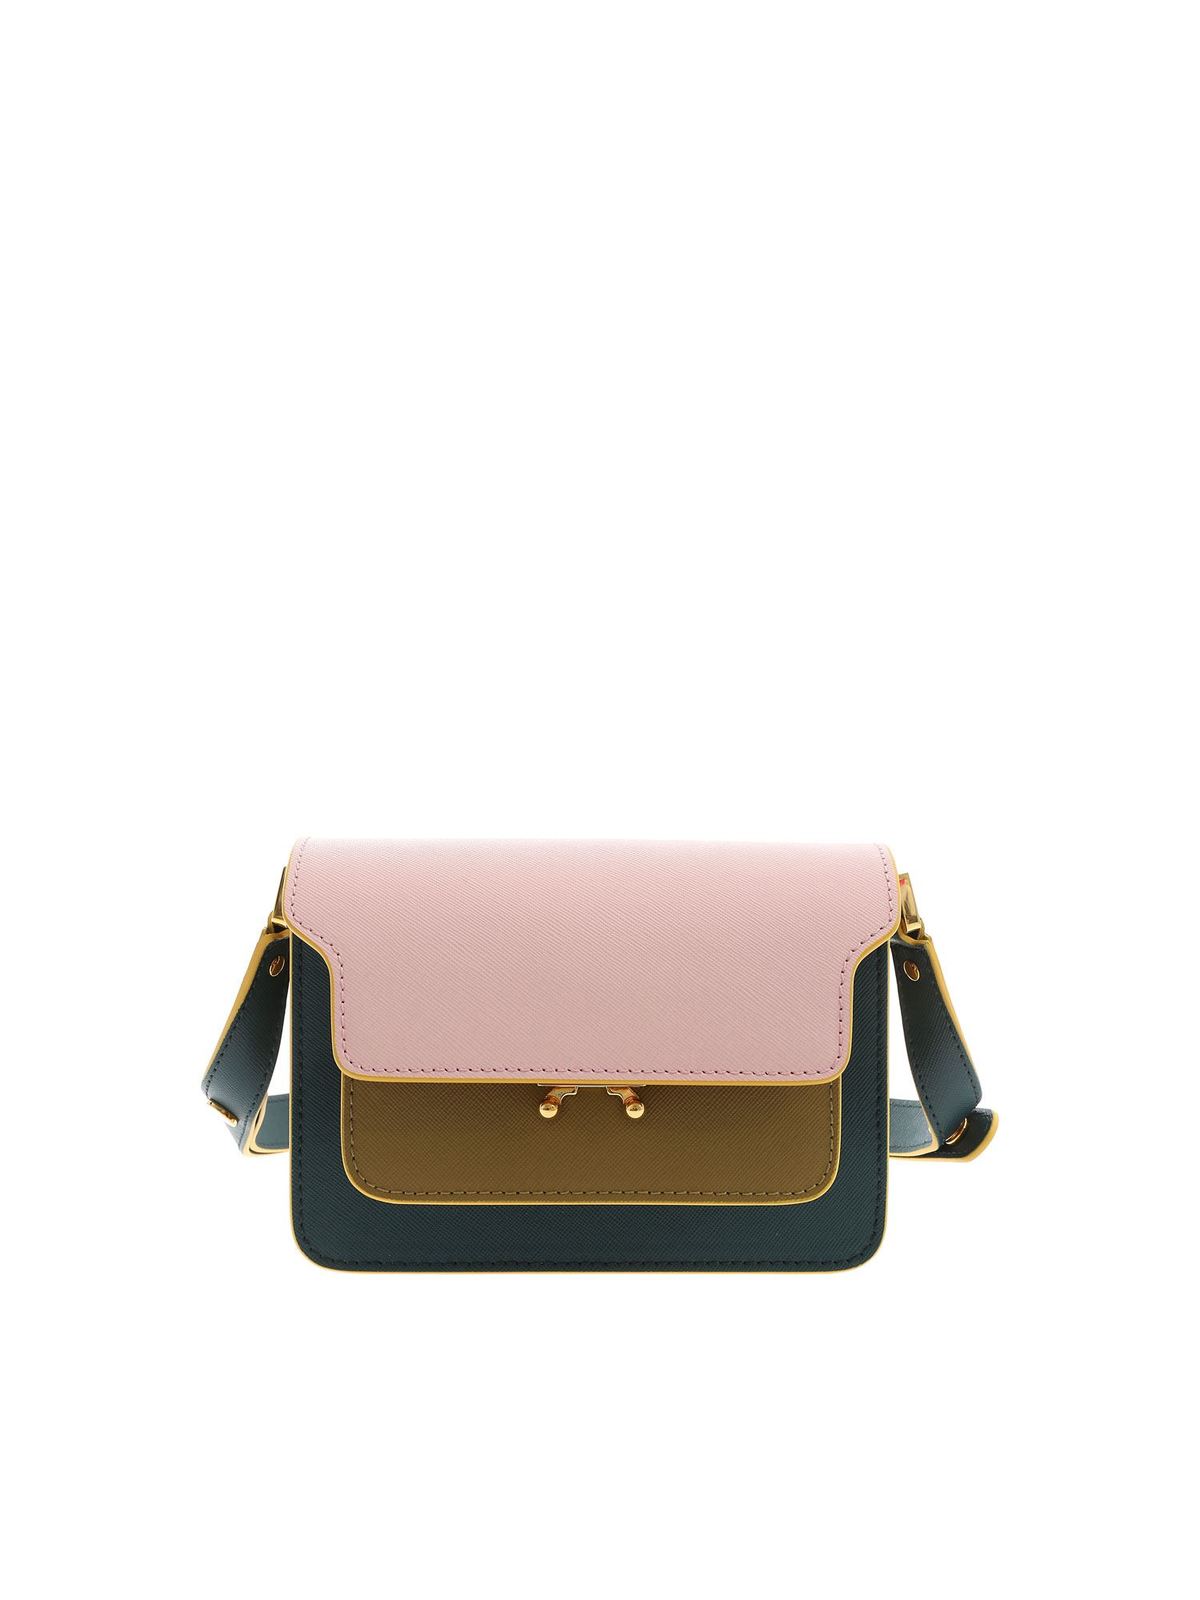 Marni Color Block Powder and Navy Blue Saffiano Leather Trunk Bag